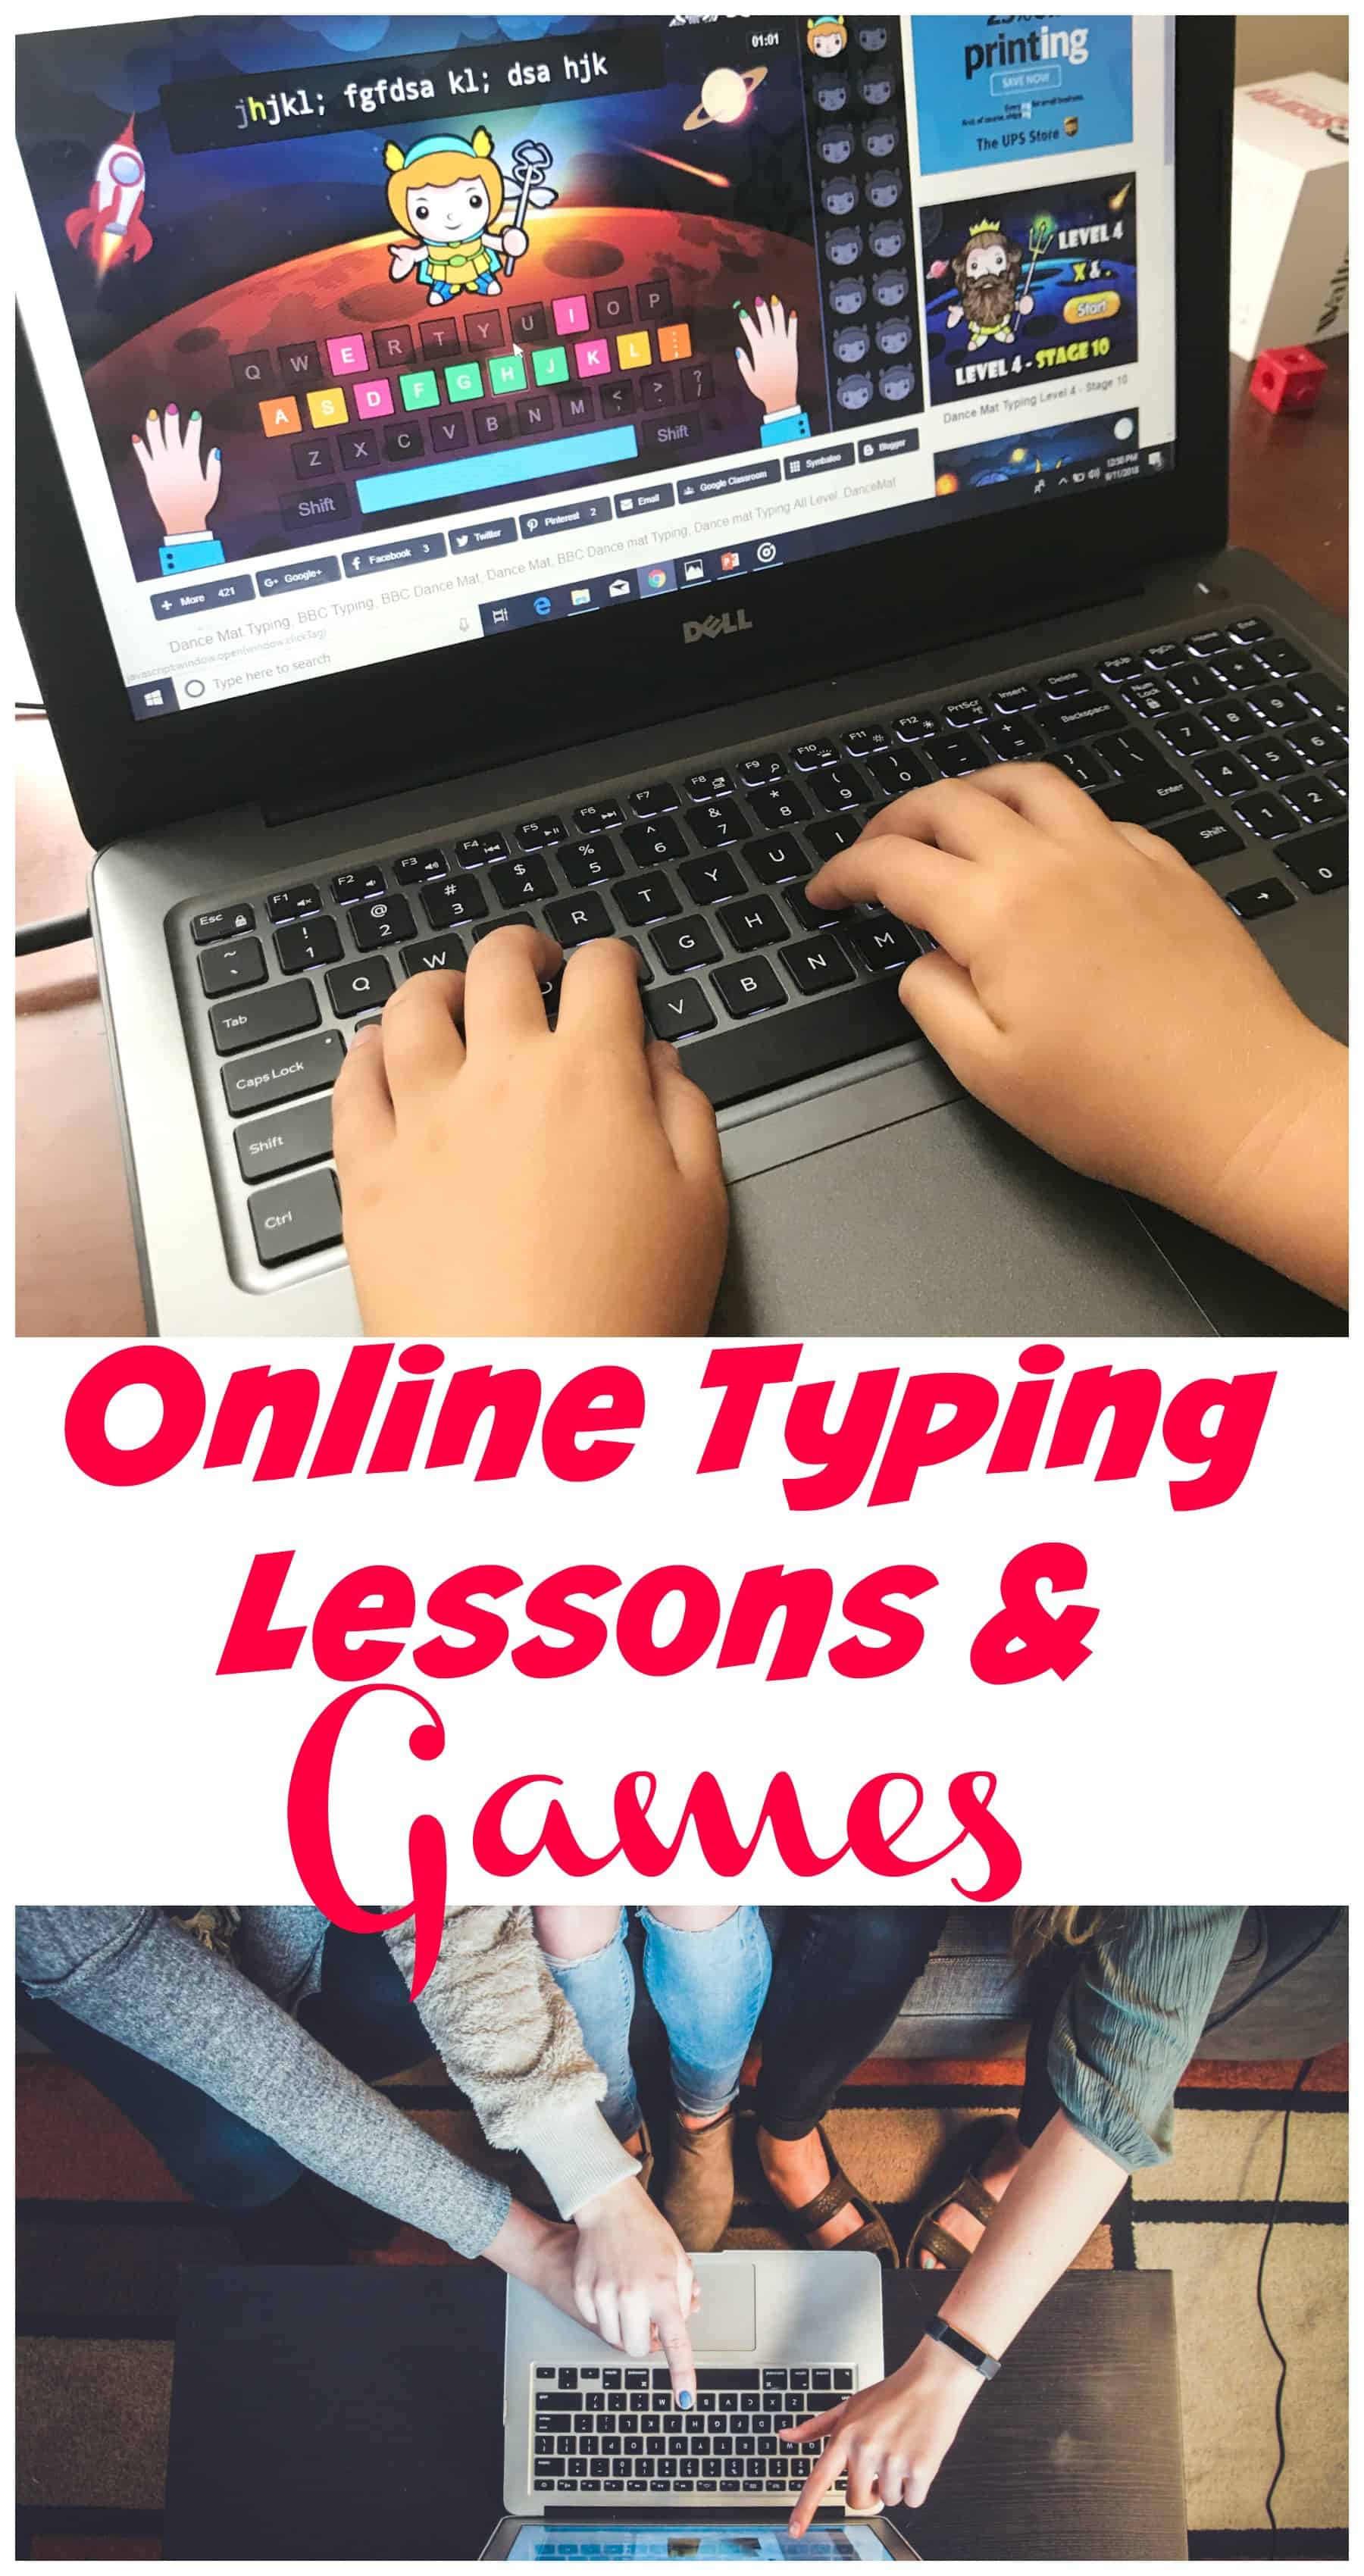 Are you looking for typing lessons online? KidzType has fun engaging lessons and free games that make learning to type fun!!!